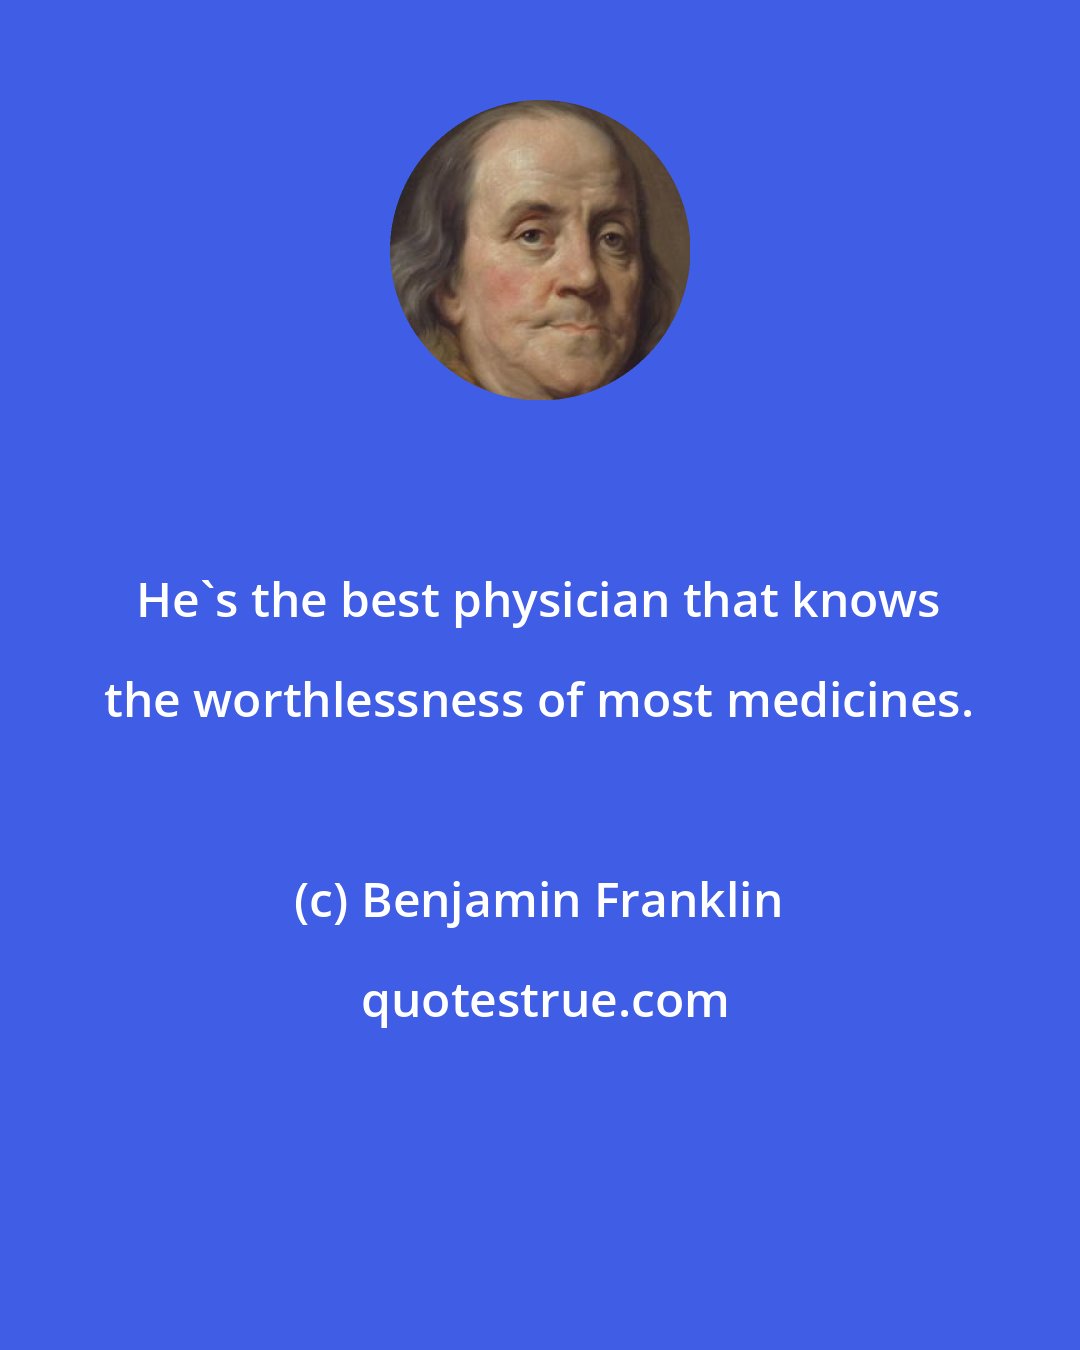 Benjamin Franklin: He's the best physician that knows the worthlessness of most medicines.